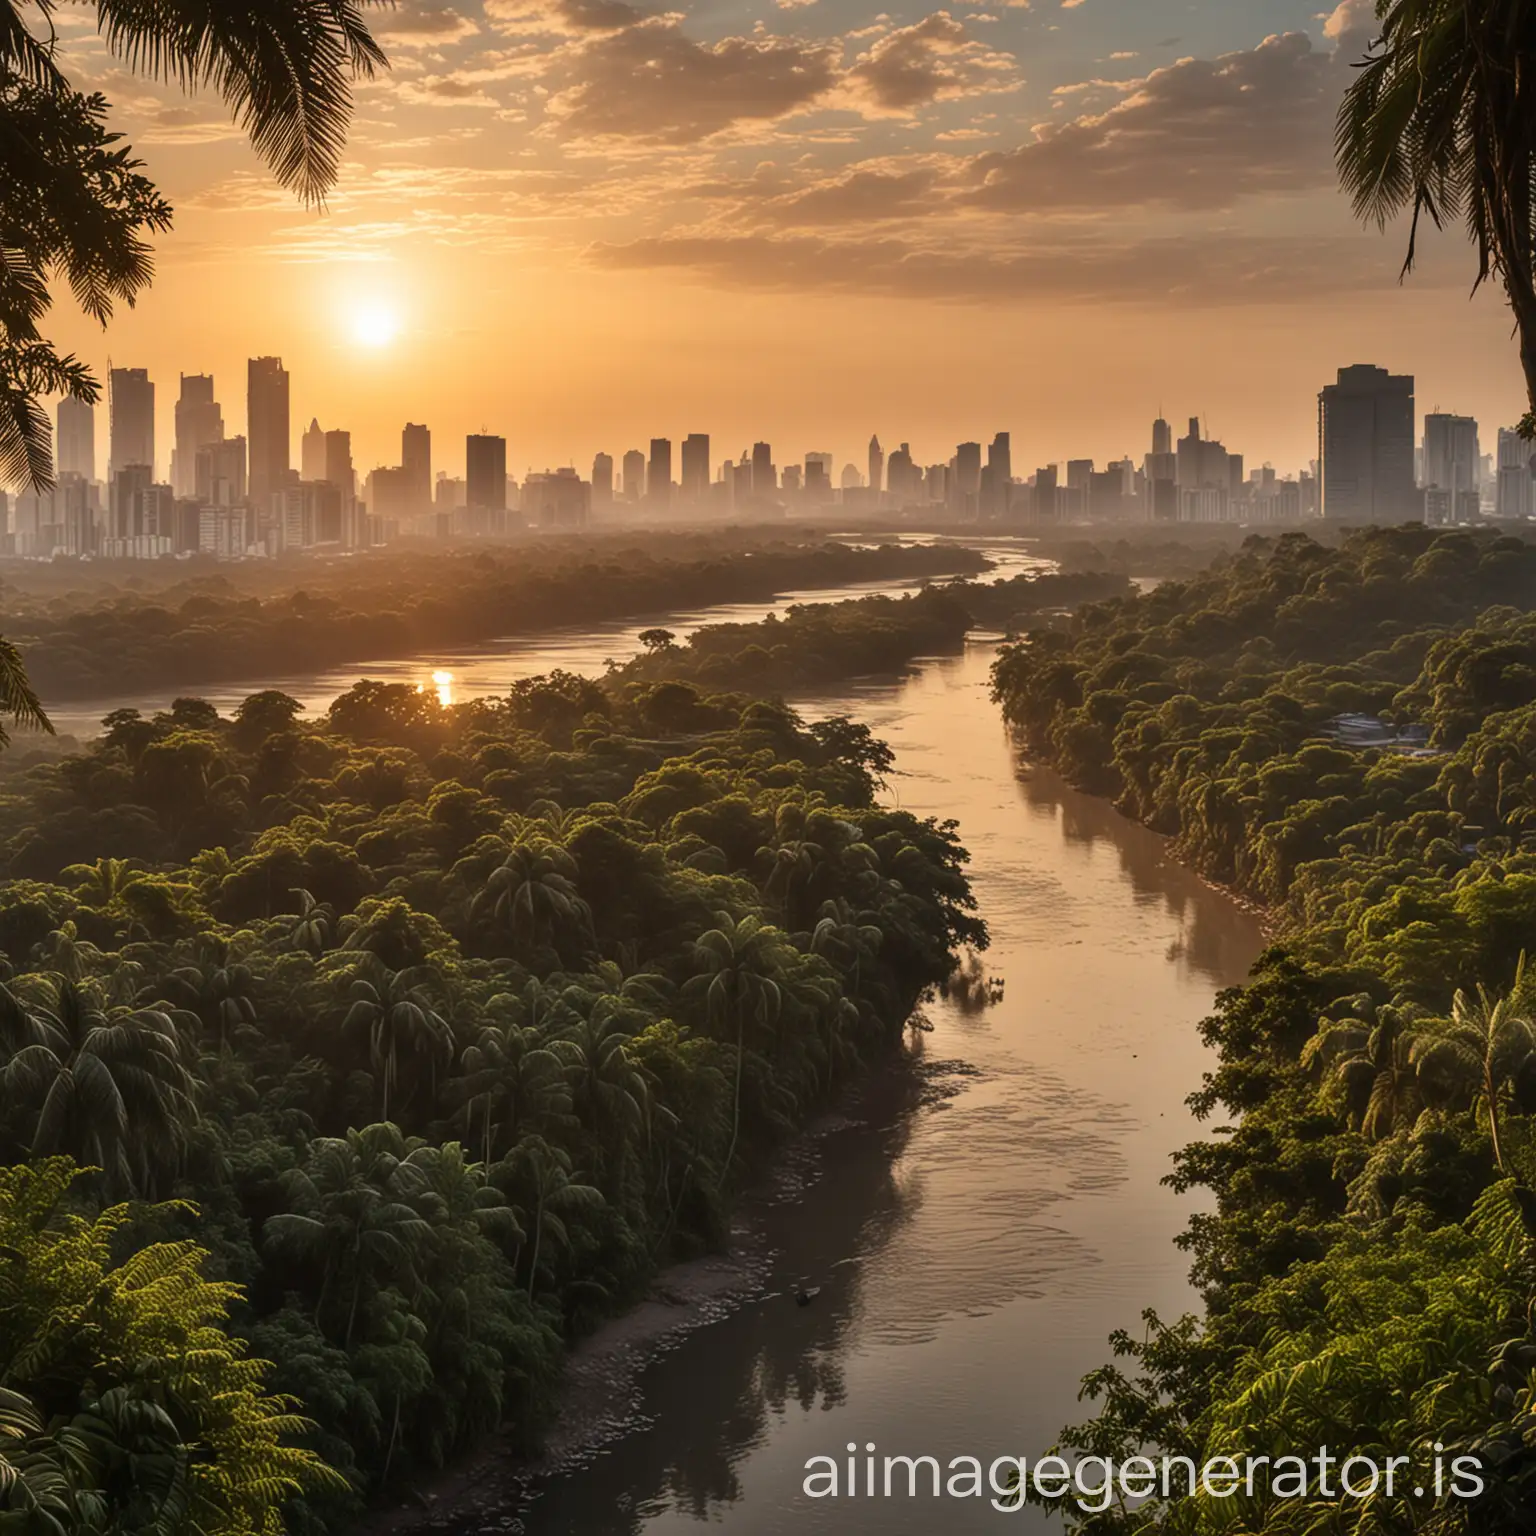 A city skyline from a jungle with a river. The sun is setting